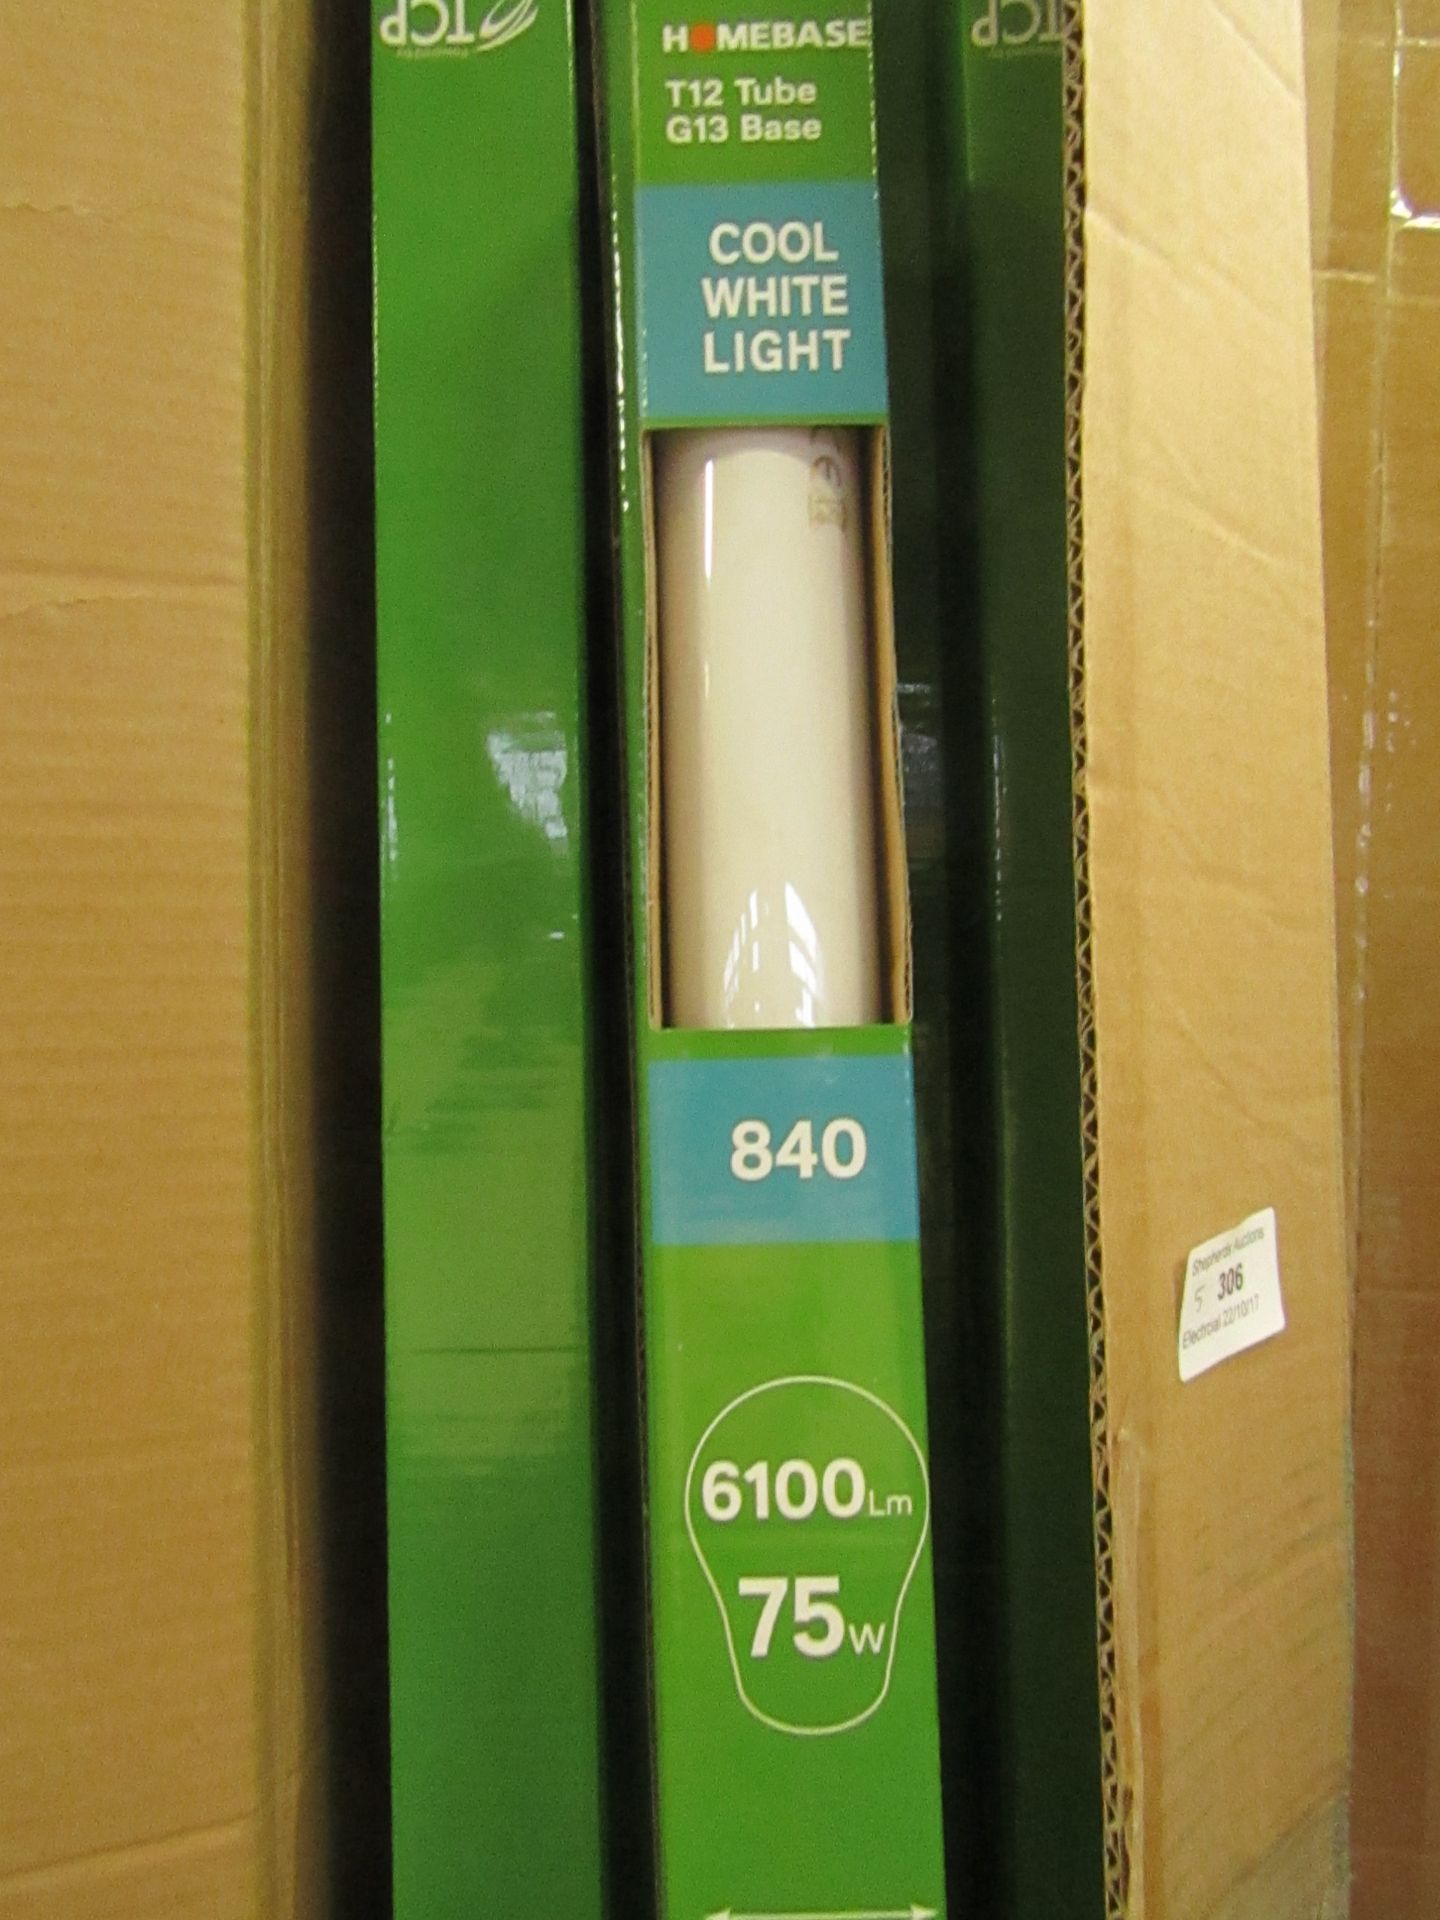 60x Homebase T12 tube light, 75w, all new and boxed. size 1778mm.